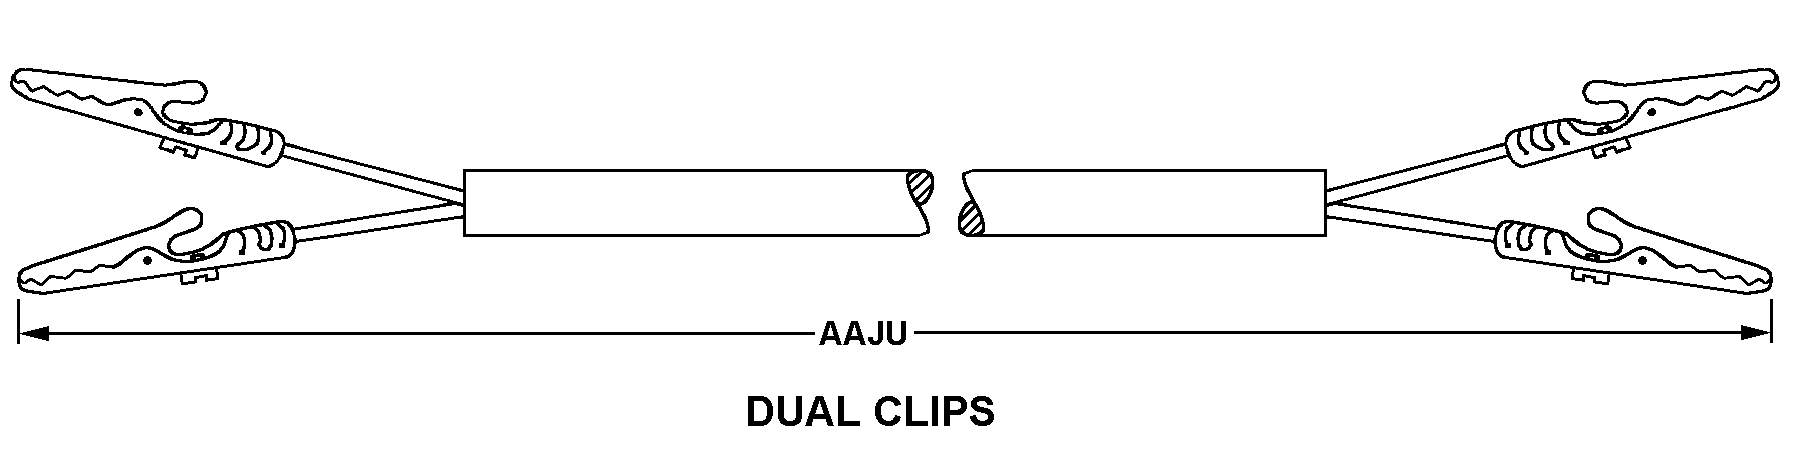 DUAL CLIPS style nsn 5995-01-584-9744